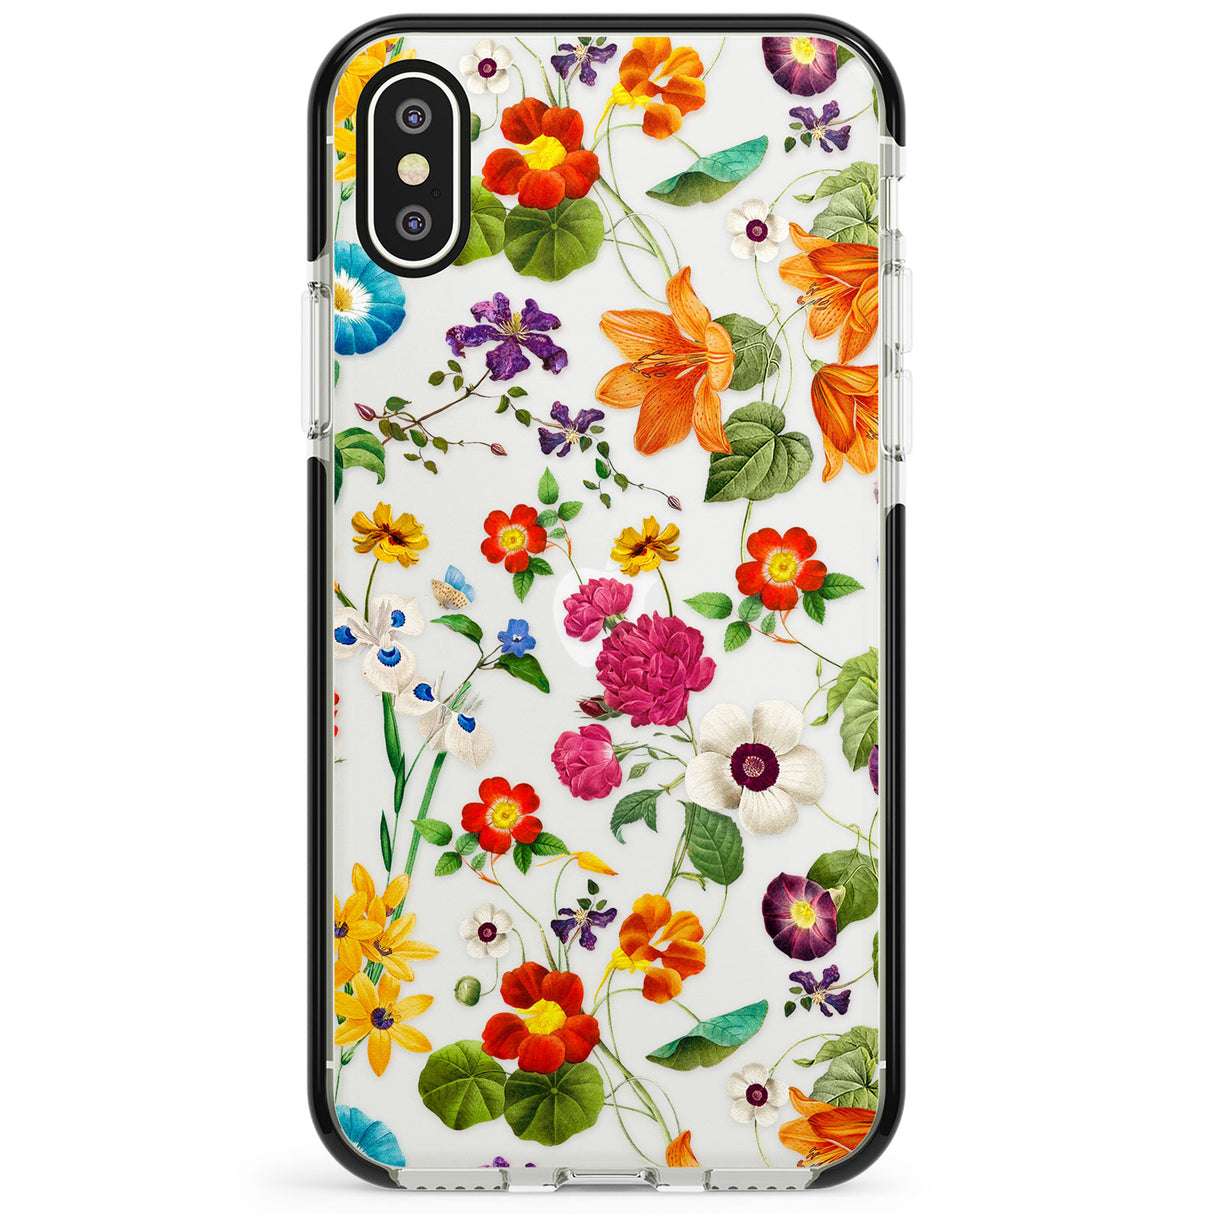 Whimsical Wildflowers Phone Case for iPhone X XS Max XR